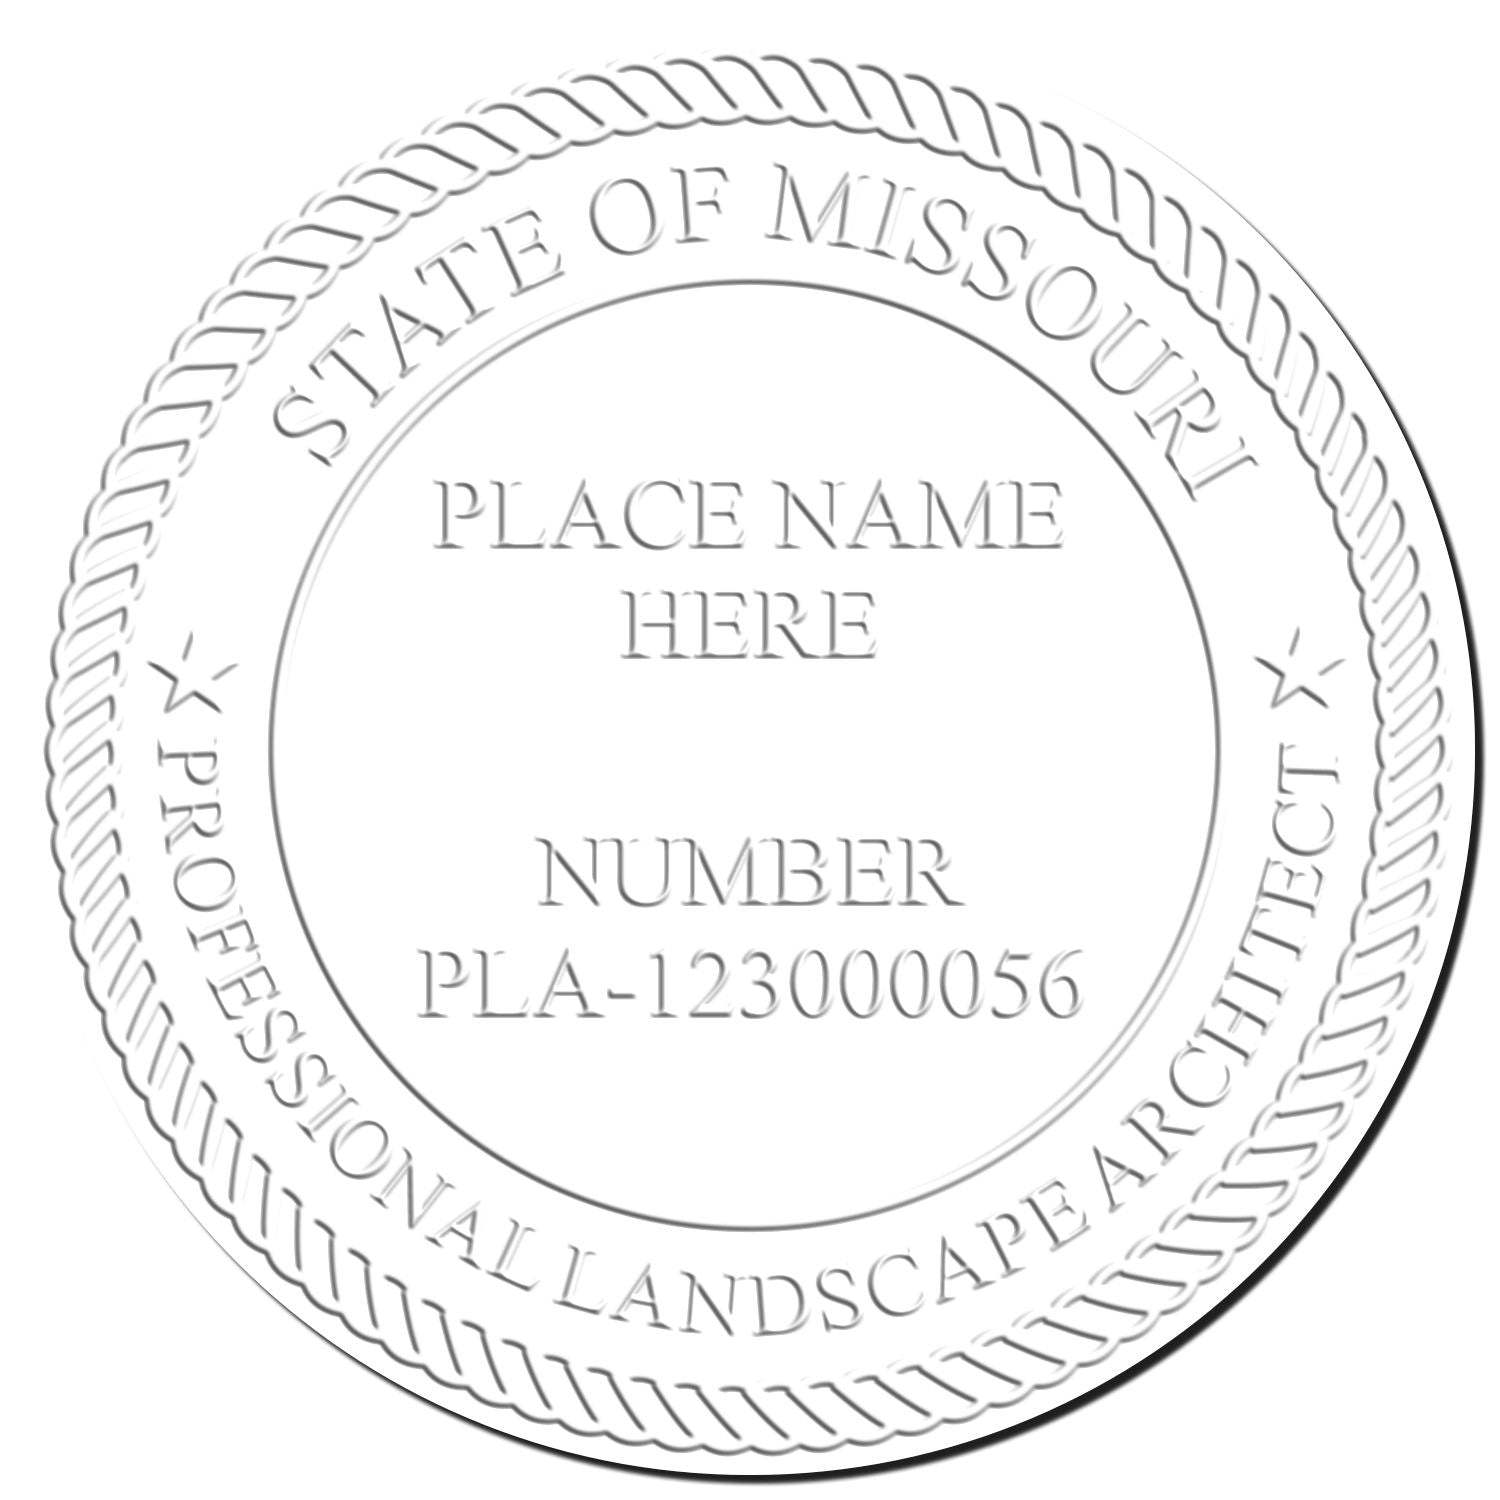 This paper is stamped with a sample imprint of the Missouri Long Reach Landscape Architect Embossing Stamp, signifying its quality and reliability.